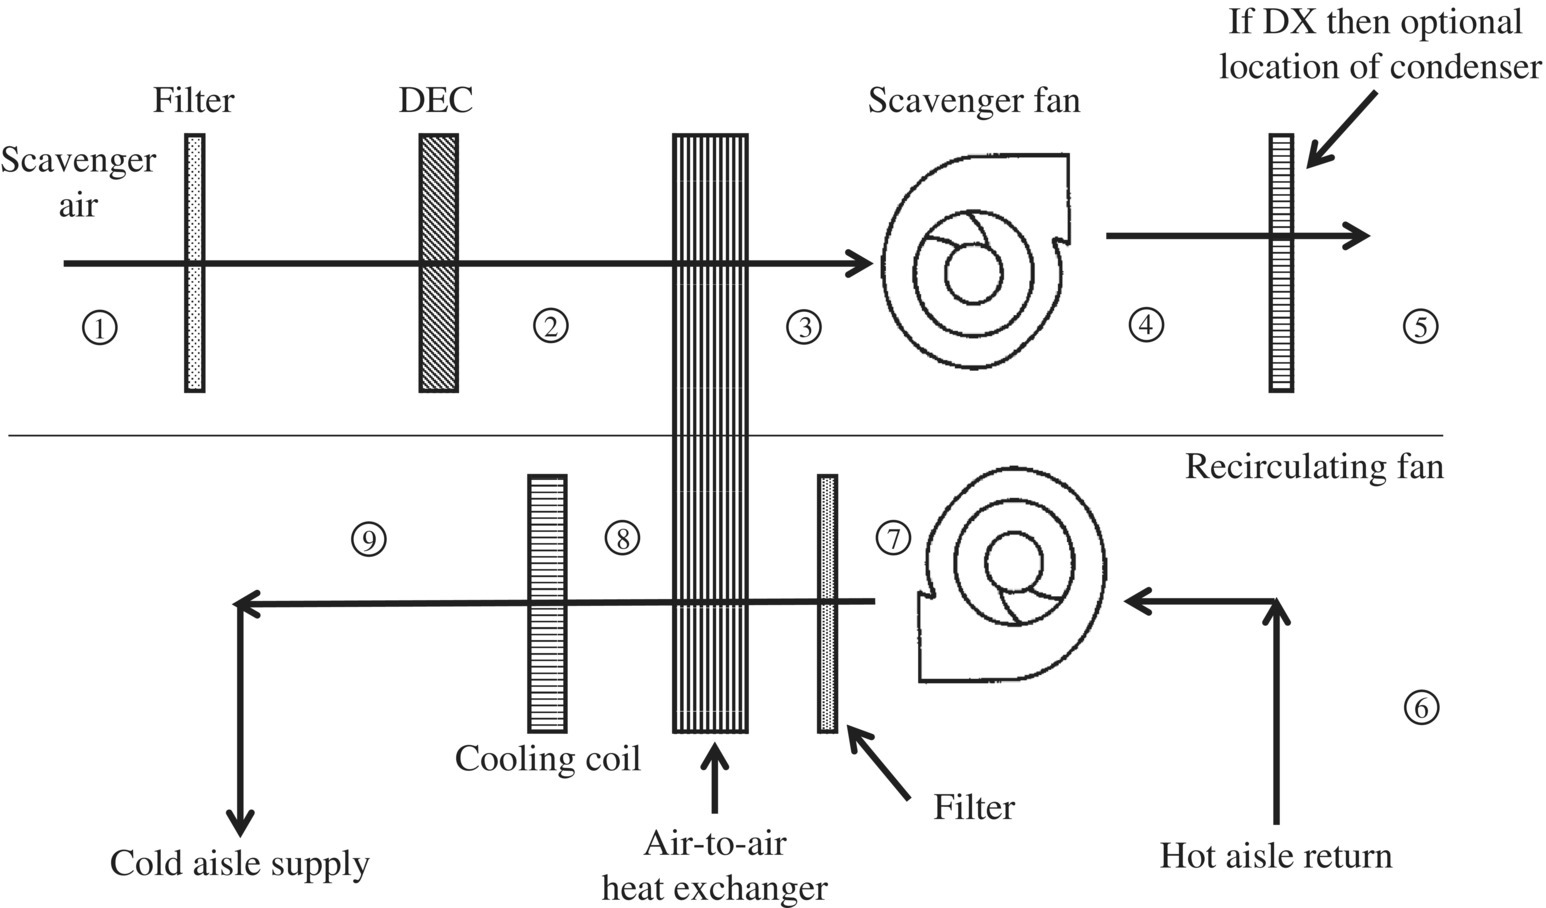 Schematic illustration of a typical indirect air-side economizer.